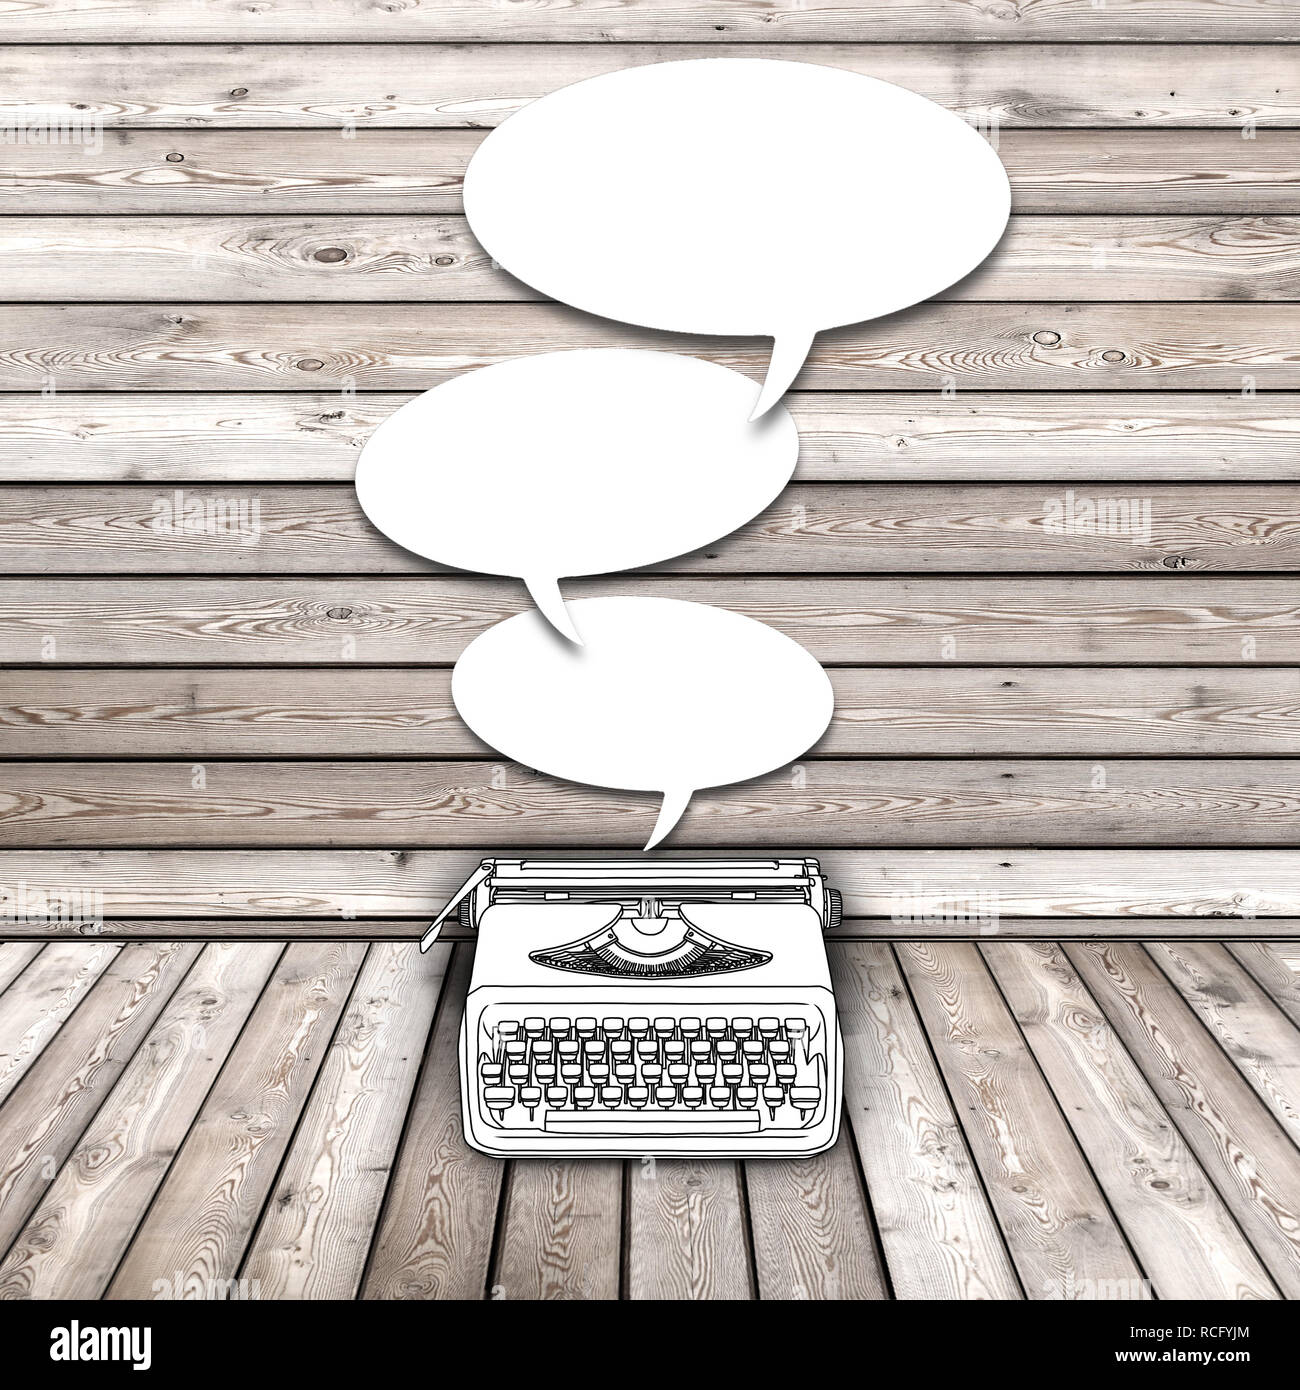 Illustration sketch drawing of typewriter with blank balloons frames on wooden boards background Stock Photo